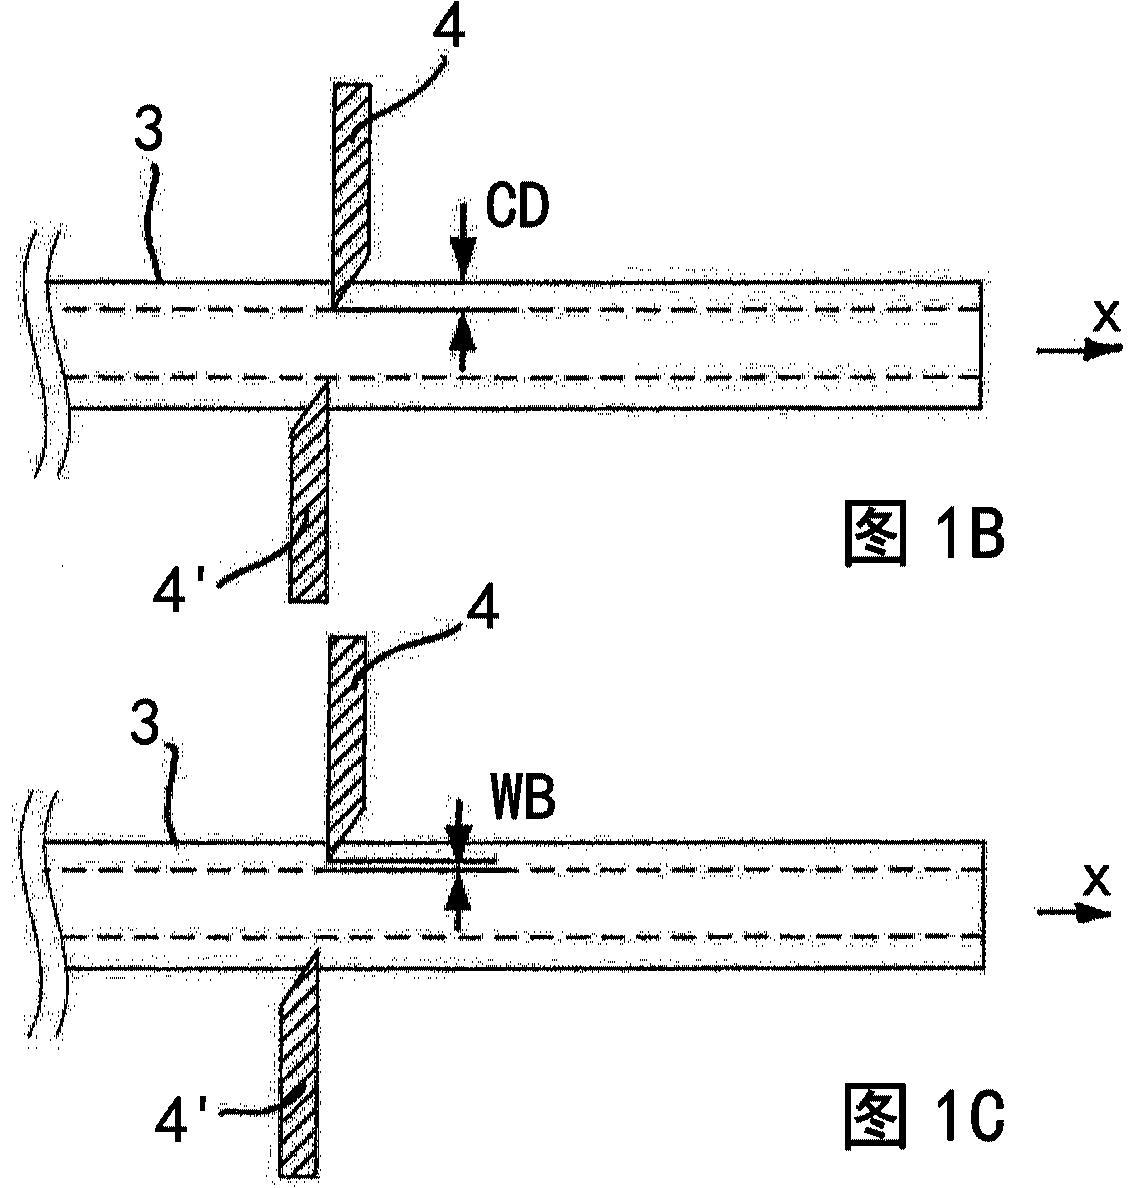 Method for determining stripping parameters for stripping cables